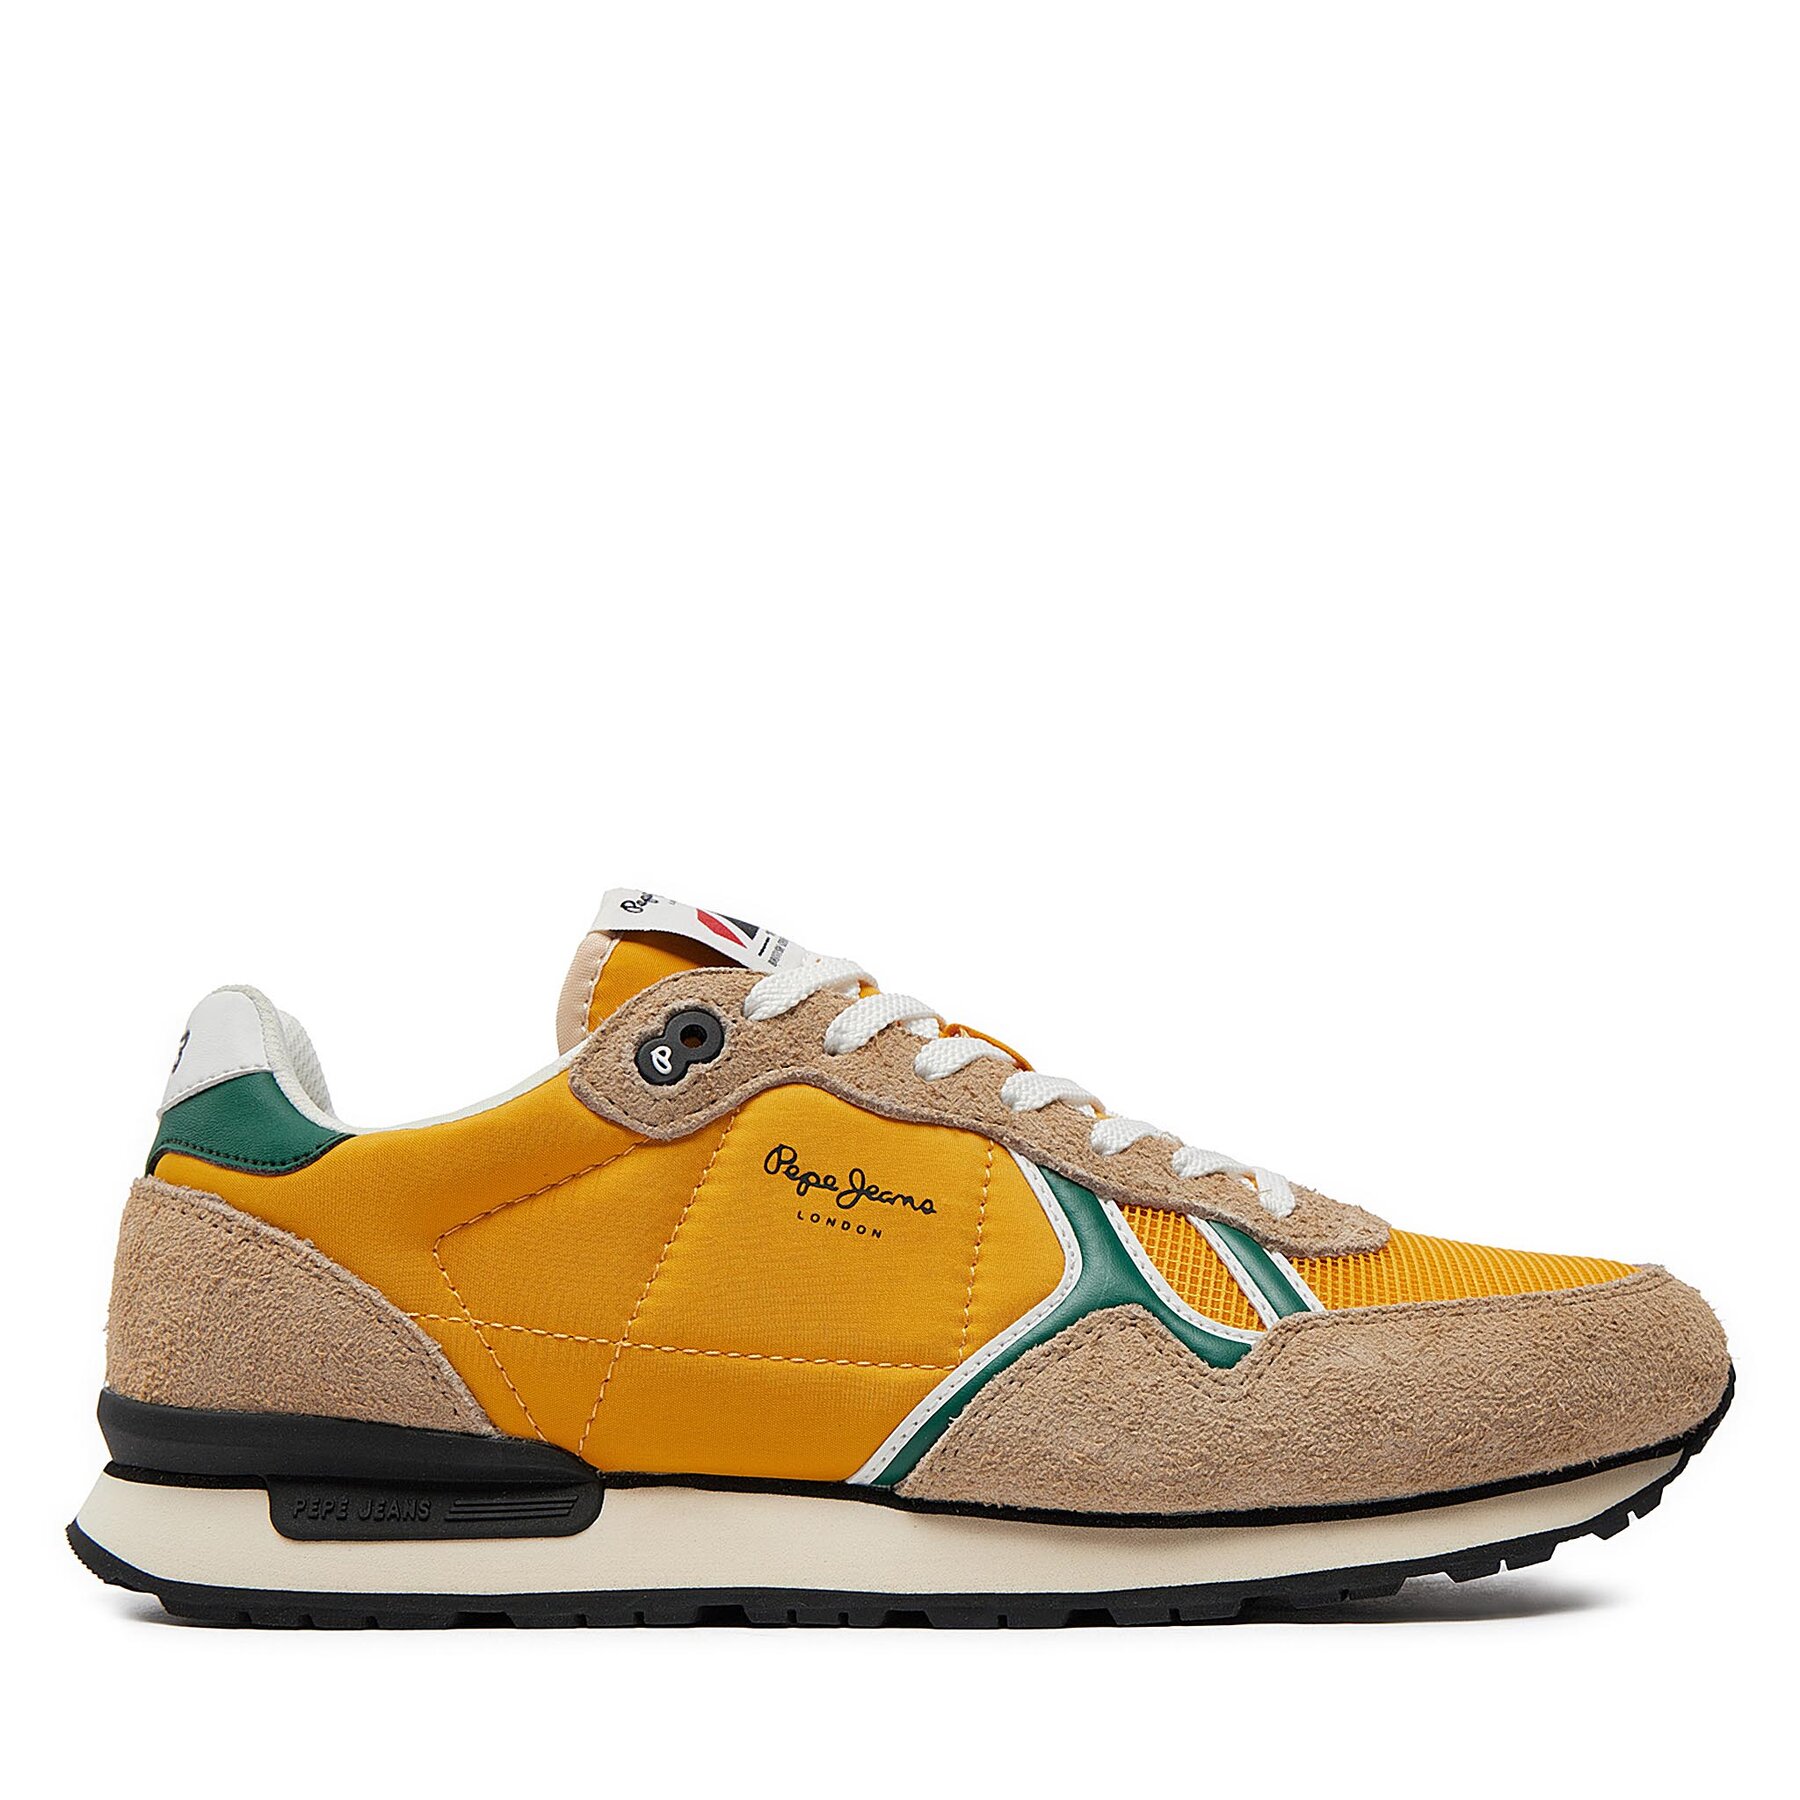 Sneakers Pepe Jeans Brit Fun M PMS31046 Rugby Yellow 069 von Pepe Jeans